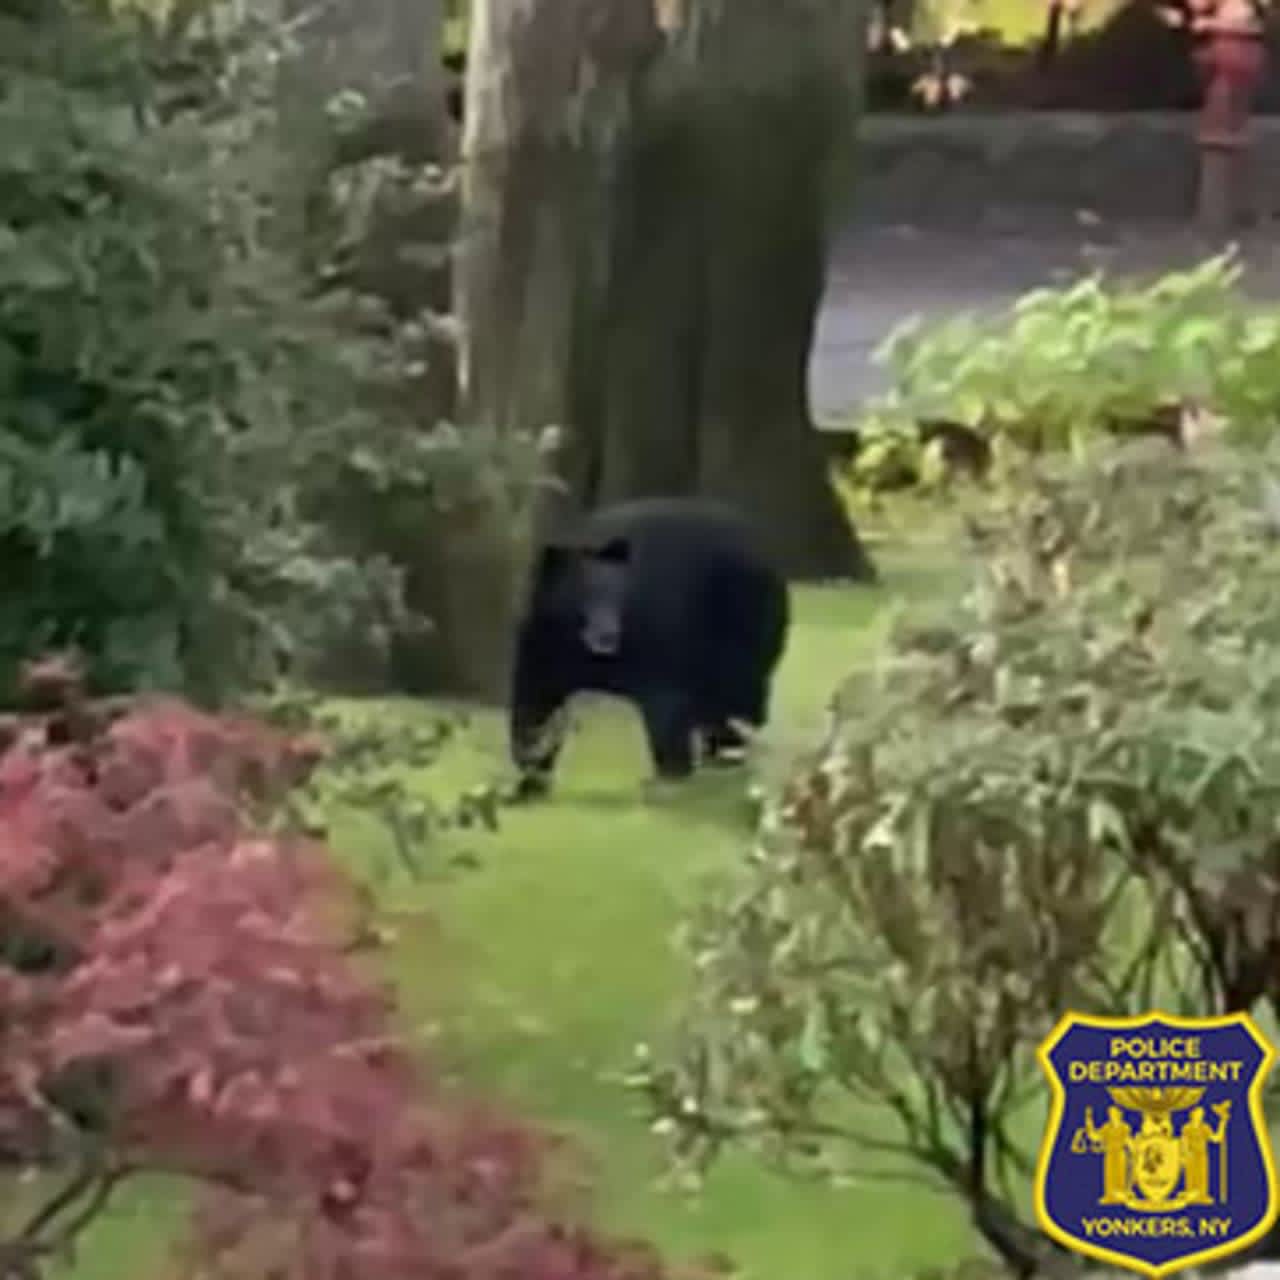 This black bear was sighted in Yonkers in the area of Essex Place at Rockledge Road, police said.